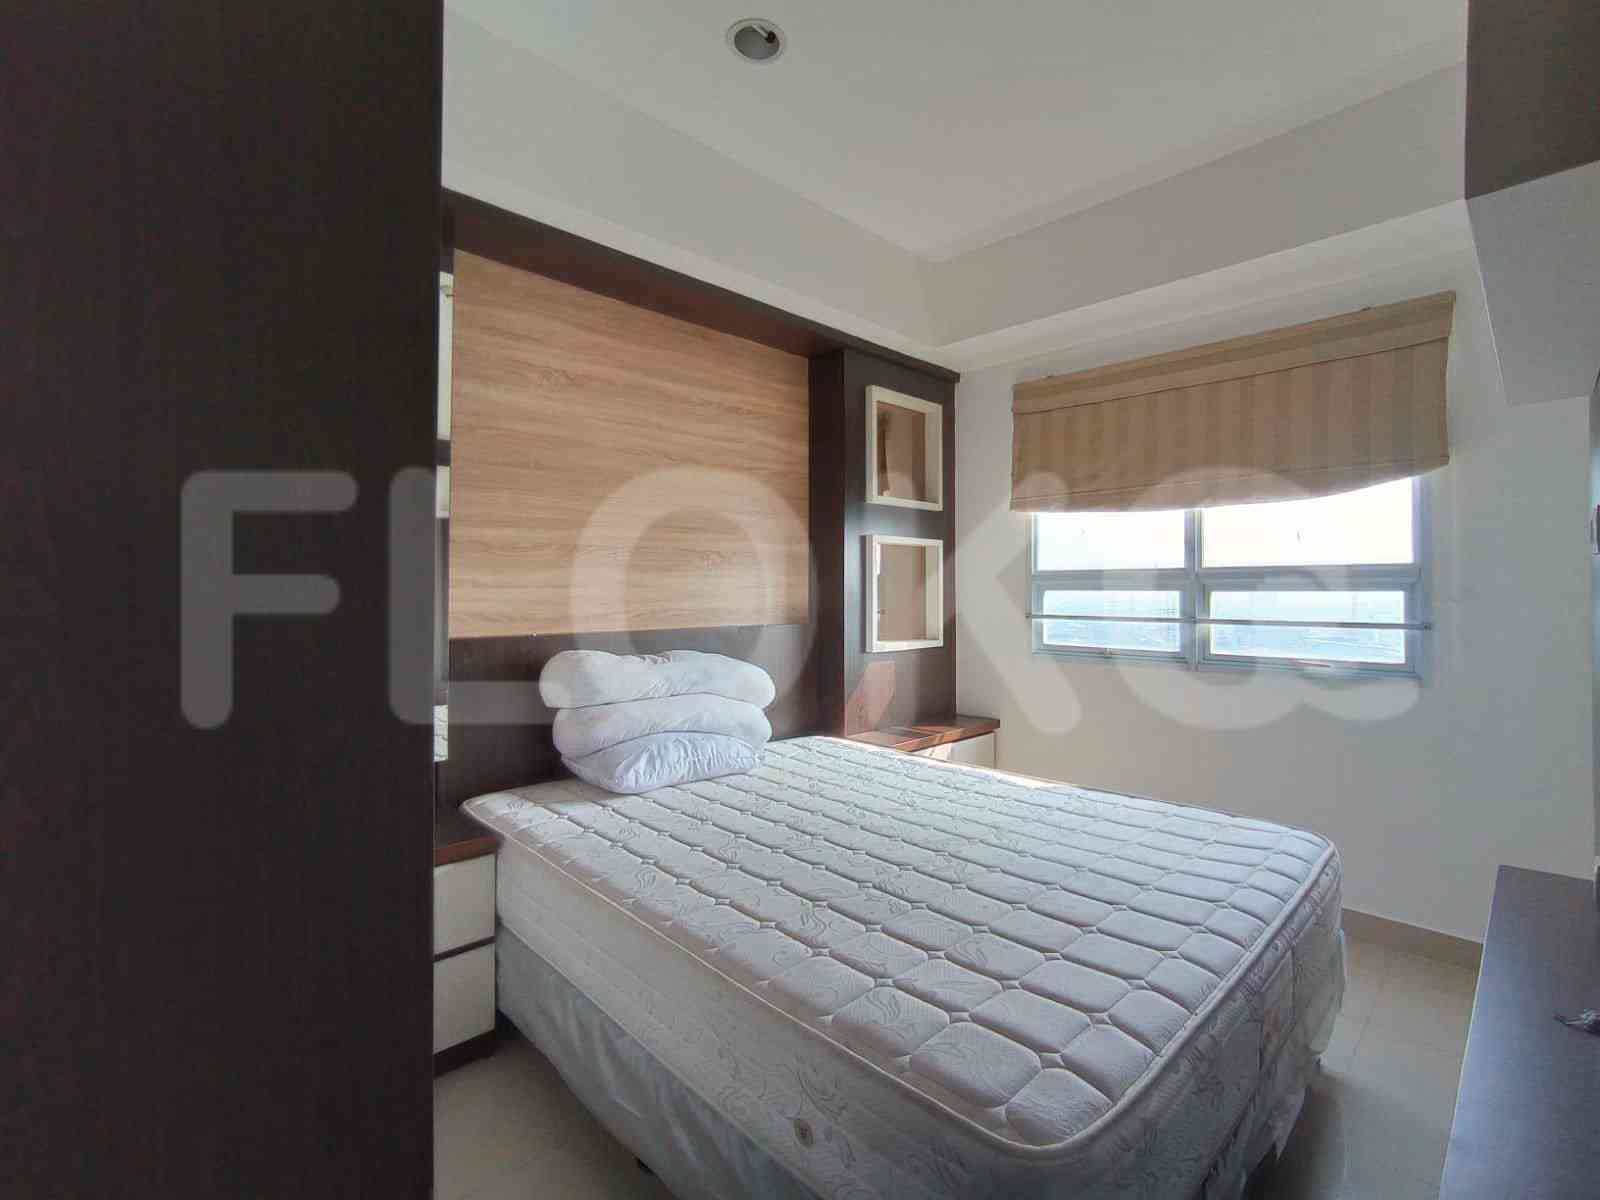 2 Bedroom on 16th Floor for Rent in Skyline Paramount Serpong - fga58c 2